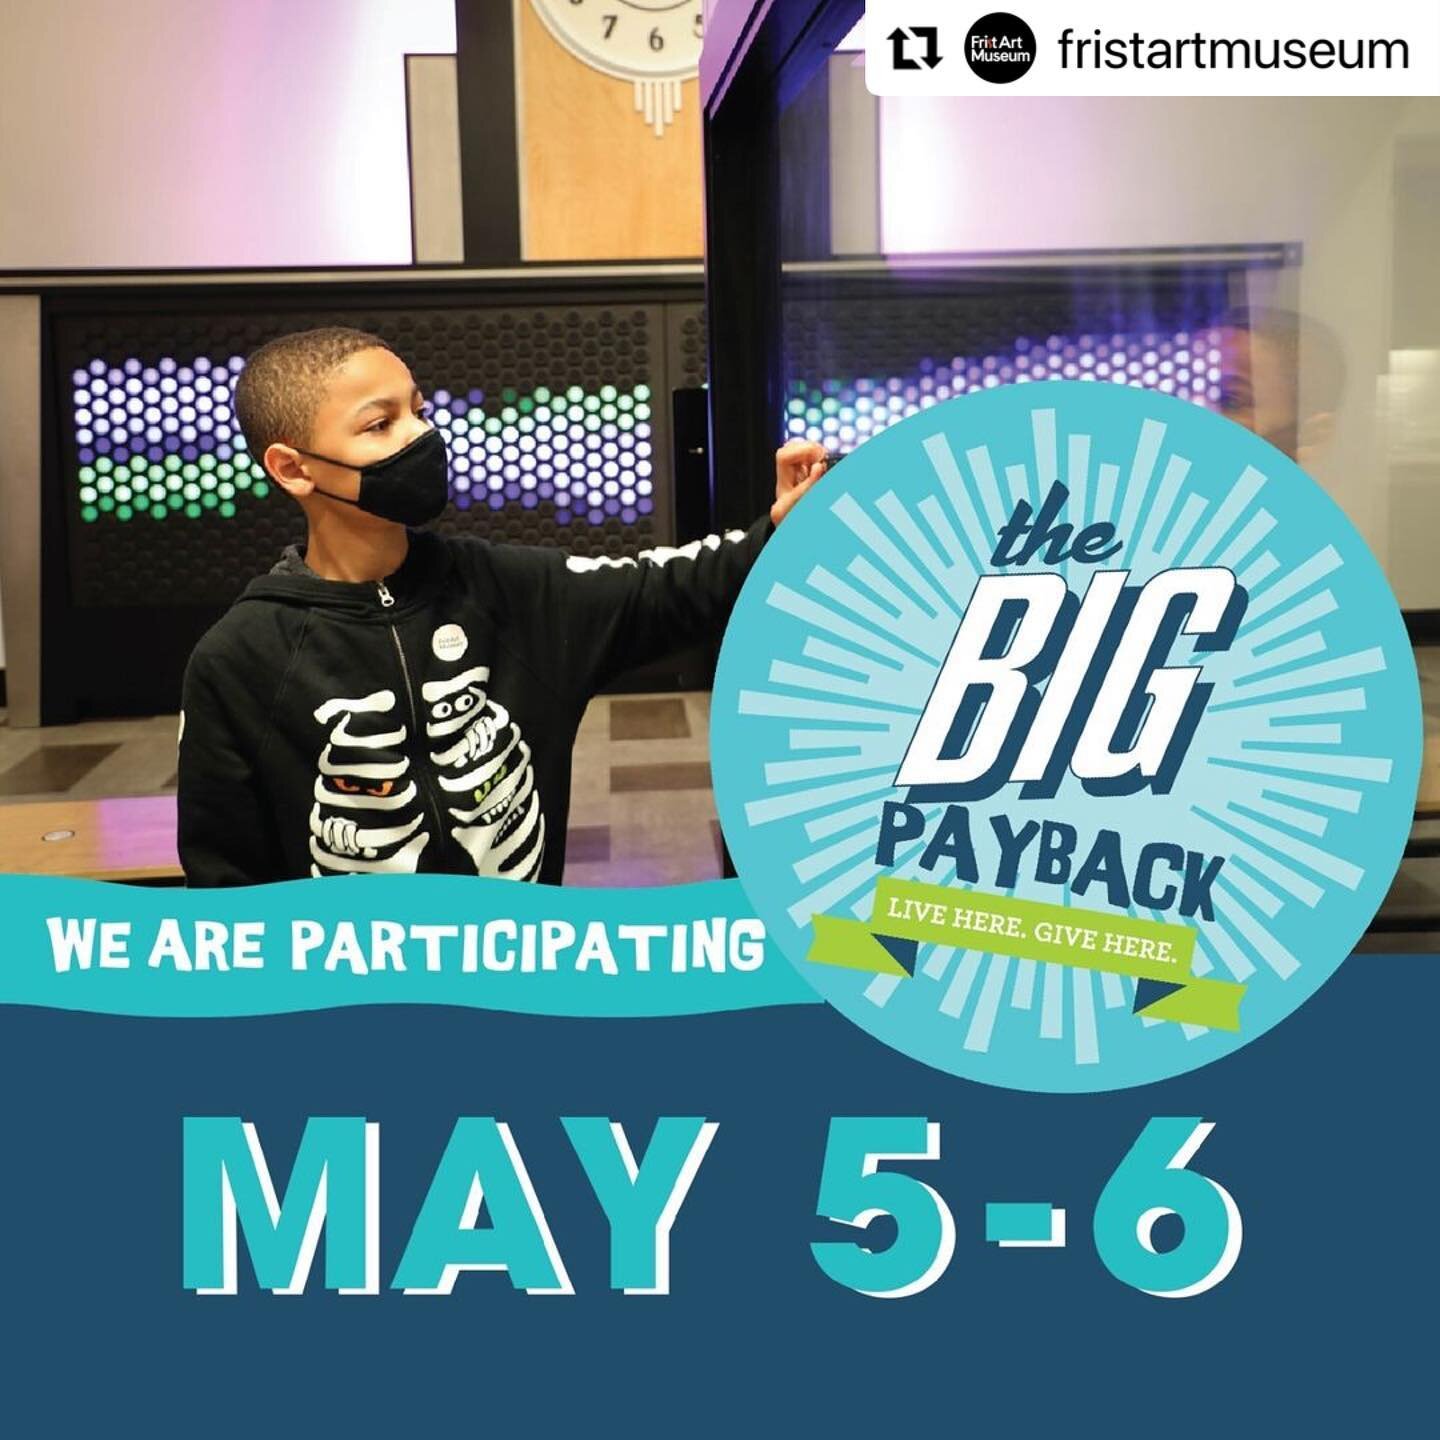 #Repost @fristartmuseum
・・・
🚨HAPPENING NOW 🚨 The #Big Payback is a 24-hour, online giving event that celebrates the work of local nonprofits and inspires Middle Tennesseans to come together, show their pride in their communities, and contribute to 